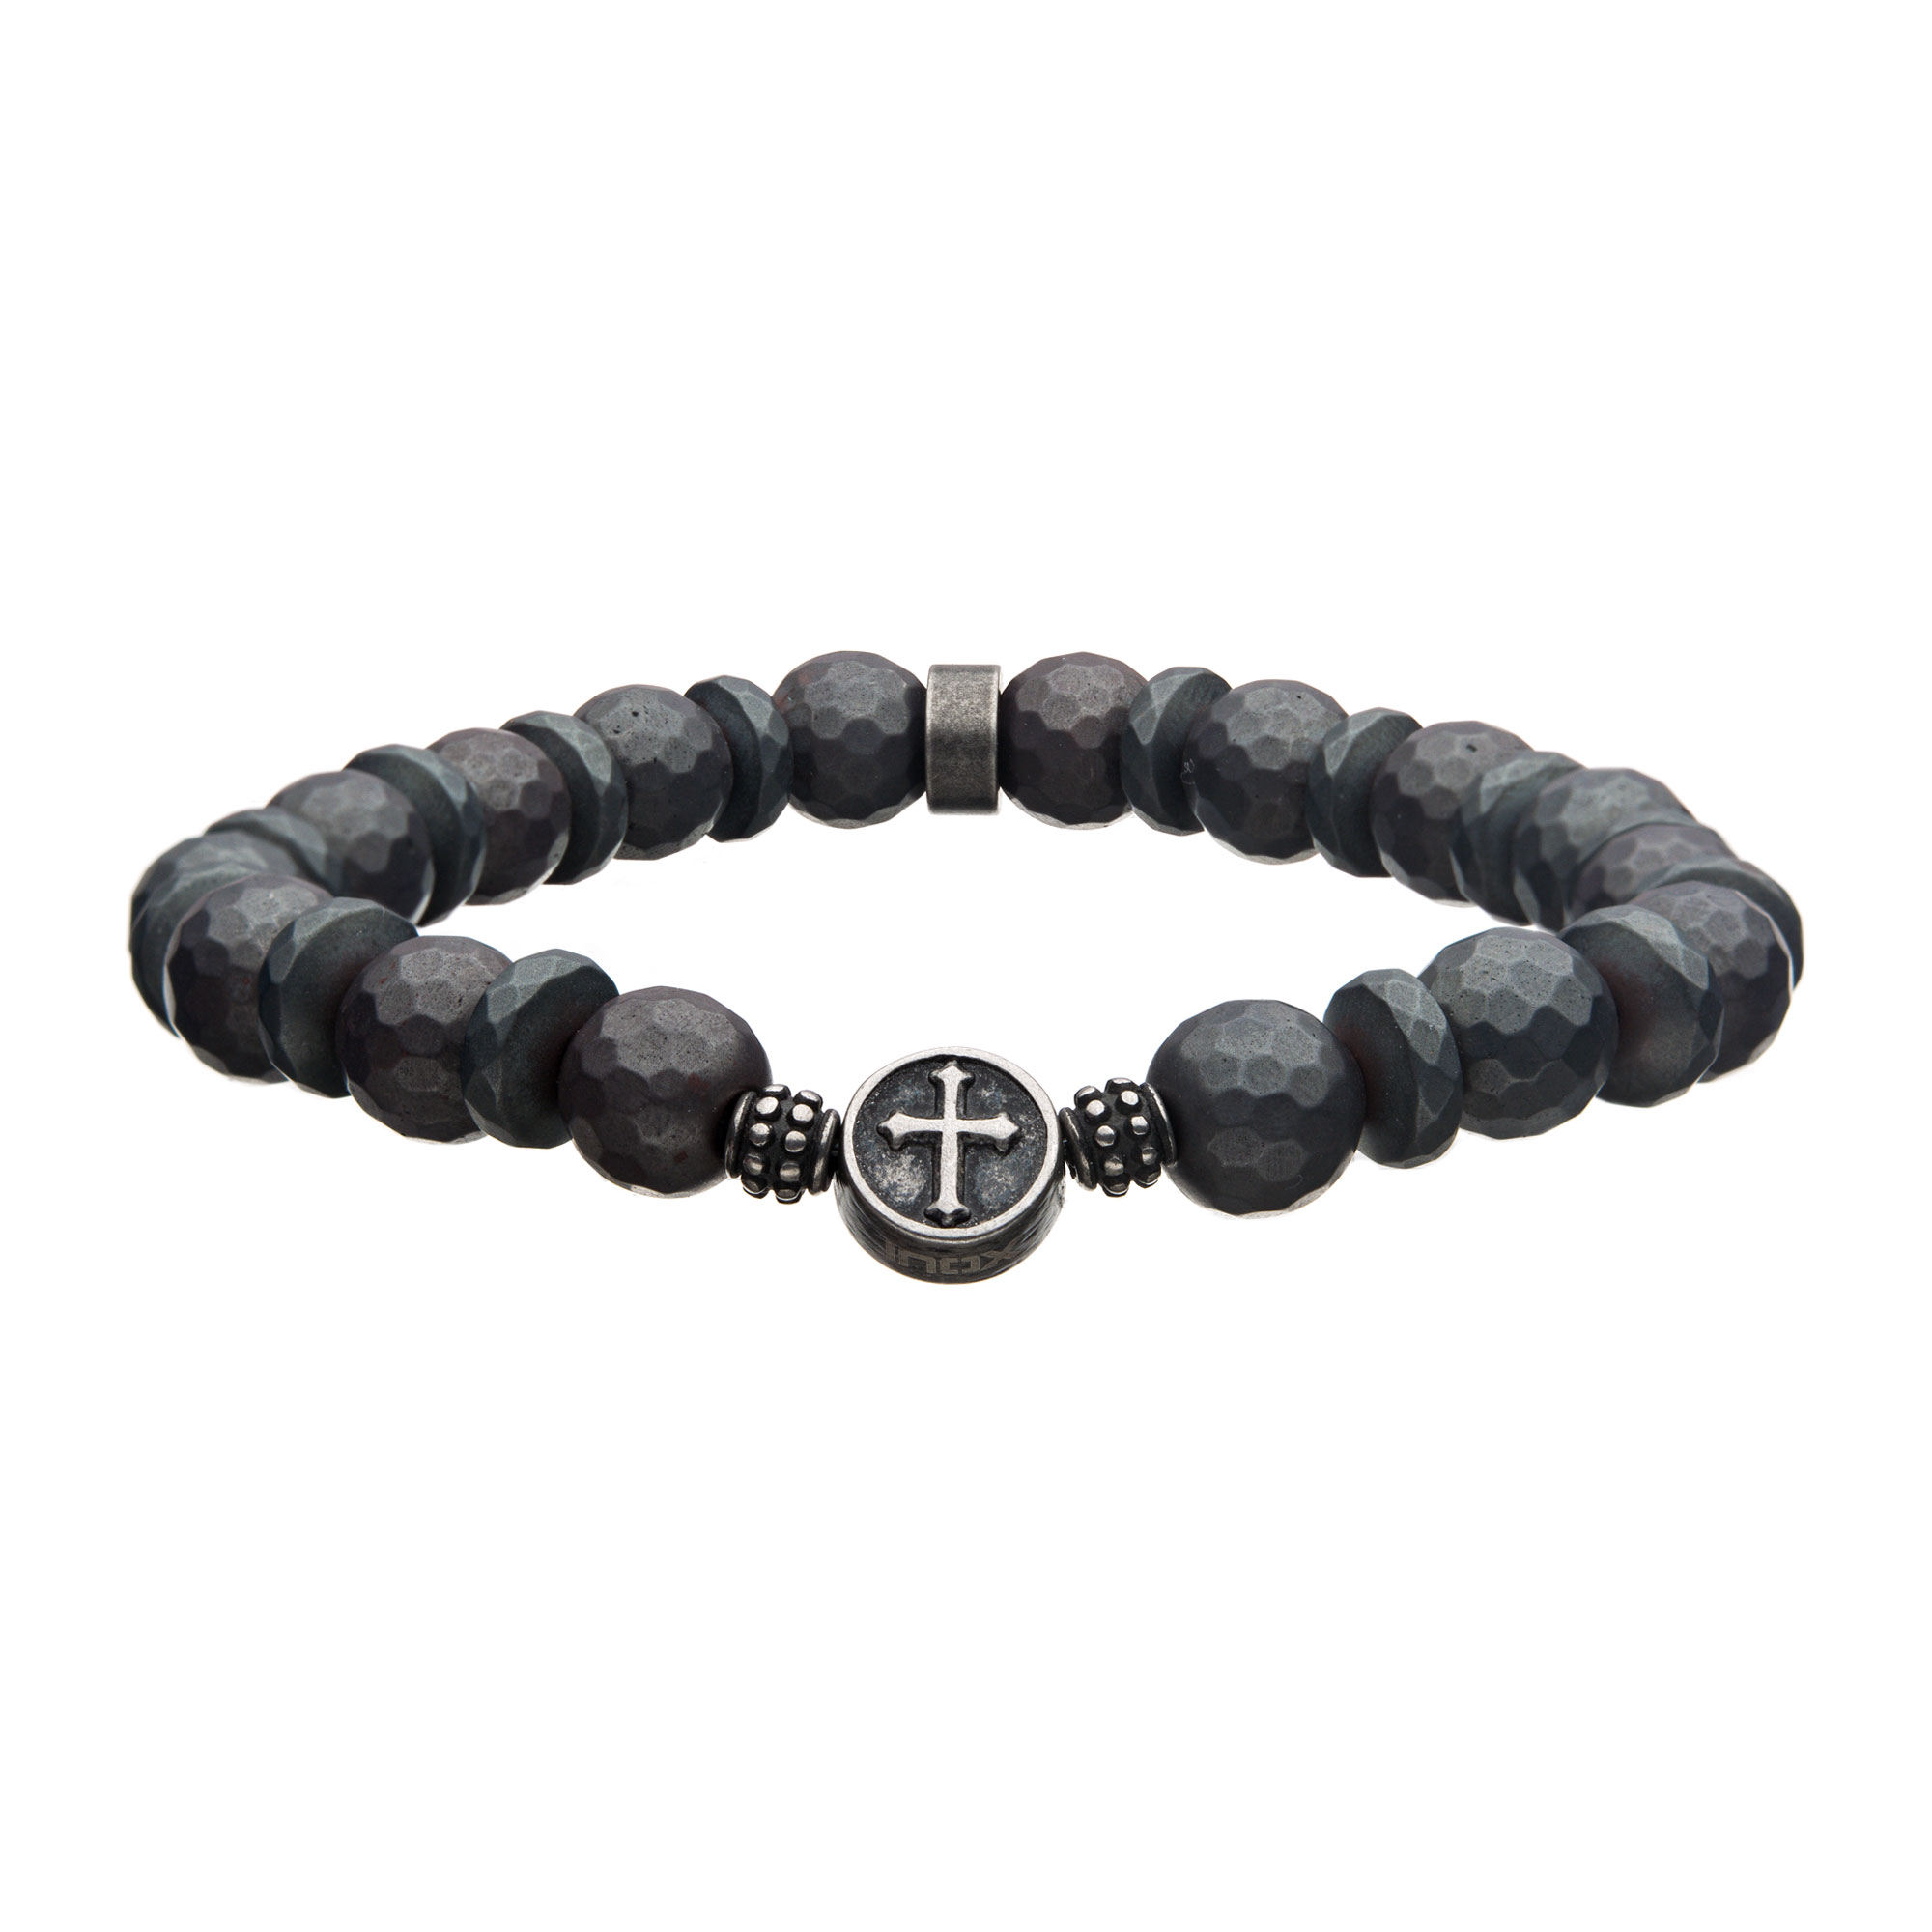 10mm Hematite Stone with Gray Silicone String Bracelet Lewis Jewelers, Inc. Ansonia, CT